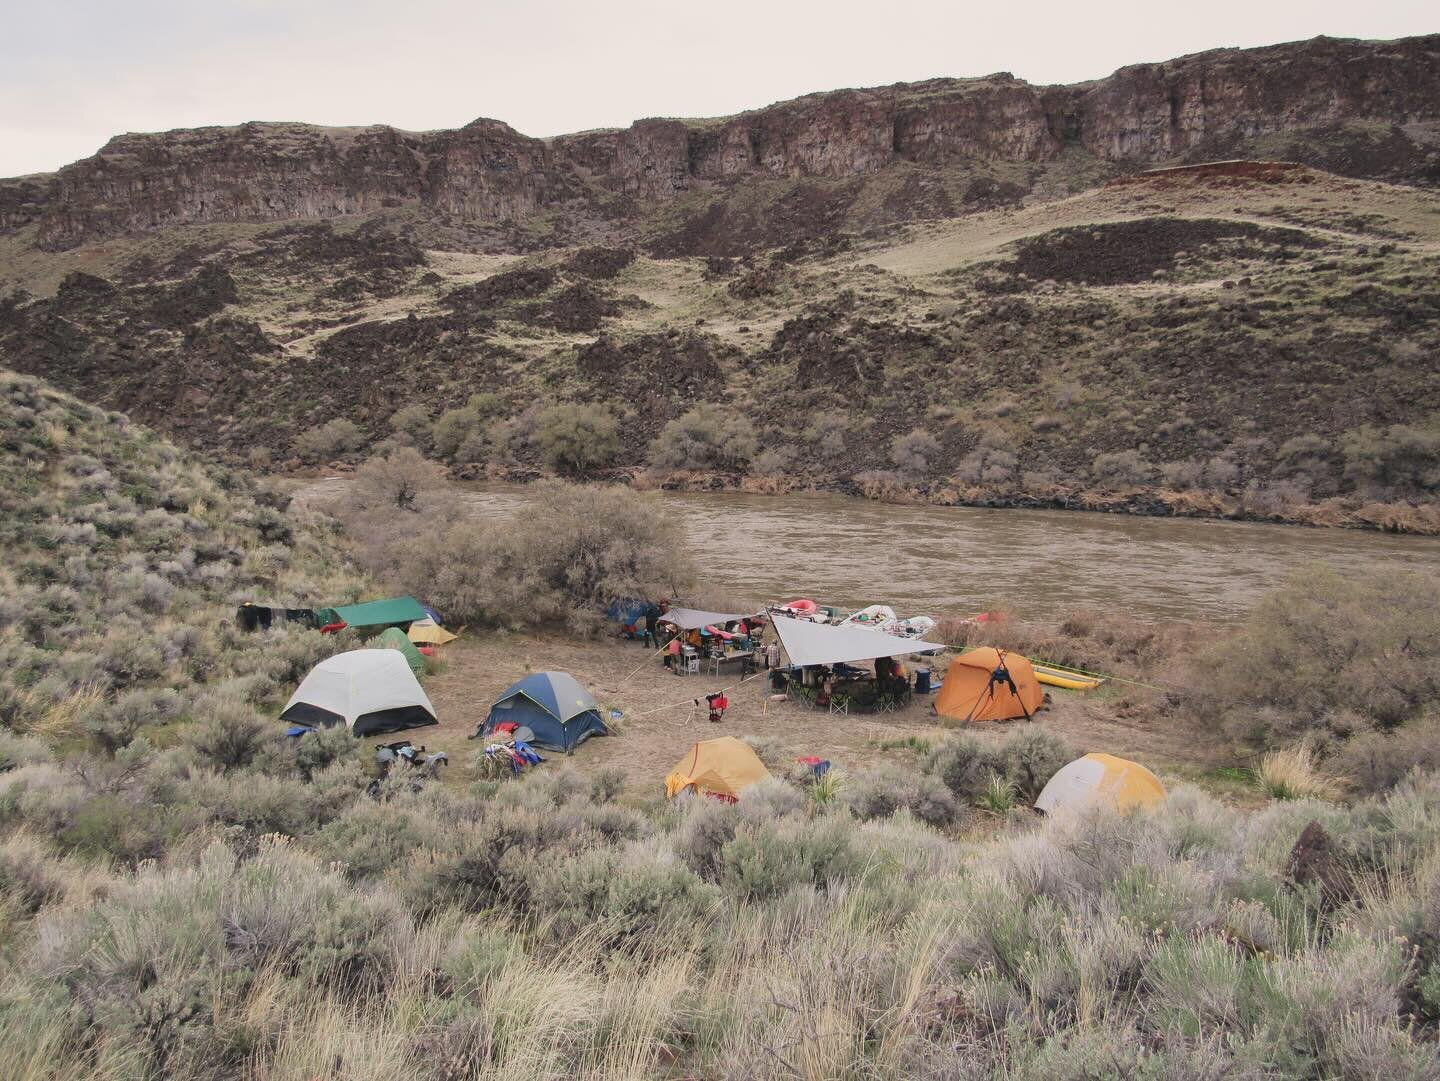 We&rsquo;ve got 5 spots available on our April 27-May 1 Owyhee River Trip! The Owyhee river is truly breathtaking and we&rsquo;d love to explore it with you. We provide all of the guides, meals, camp and rafting gear, you just show up ready to unplug